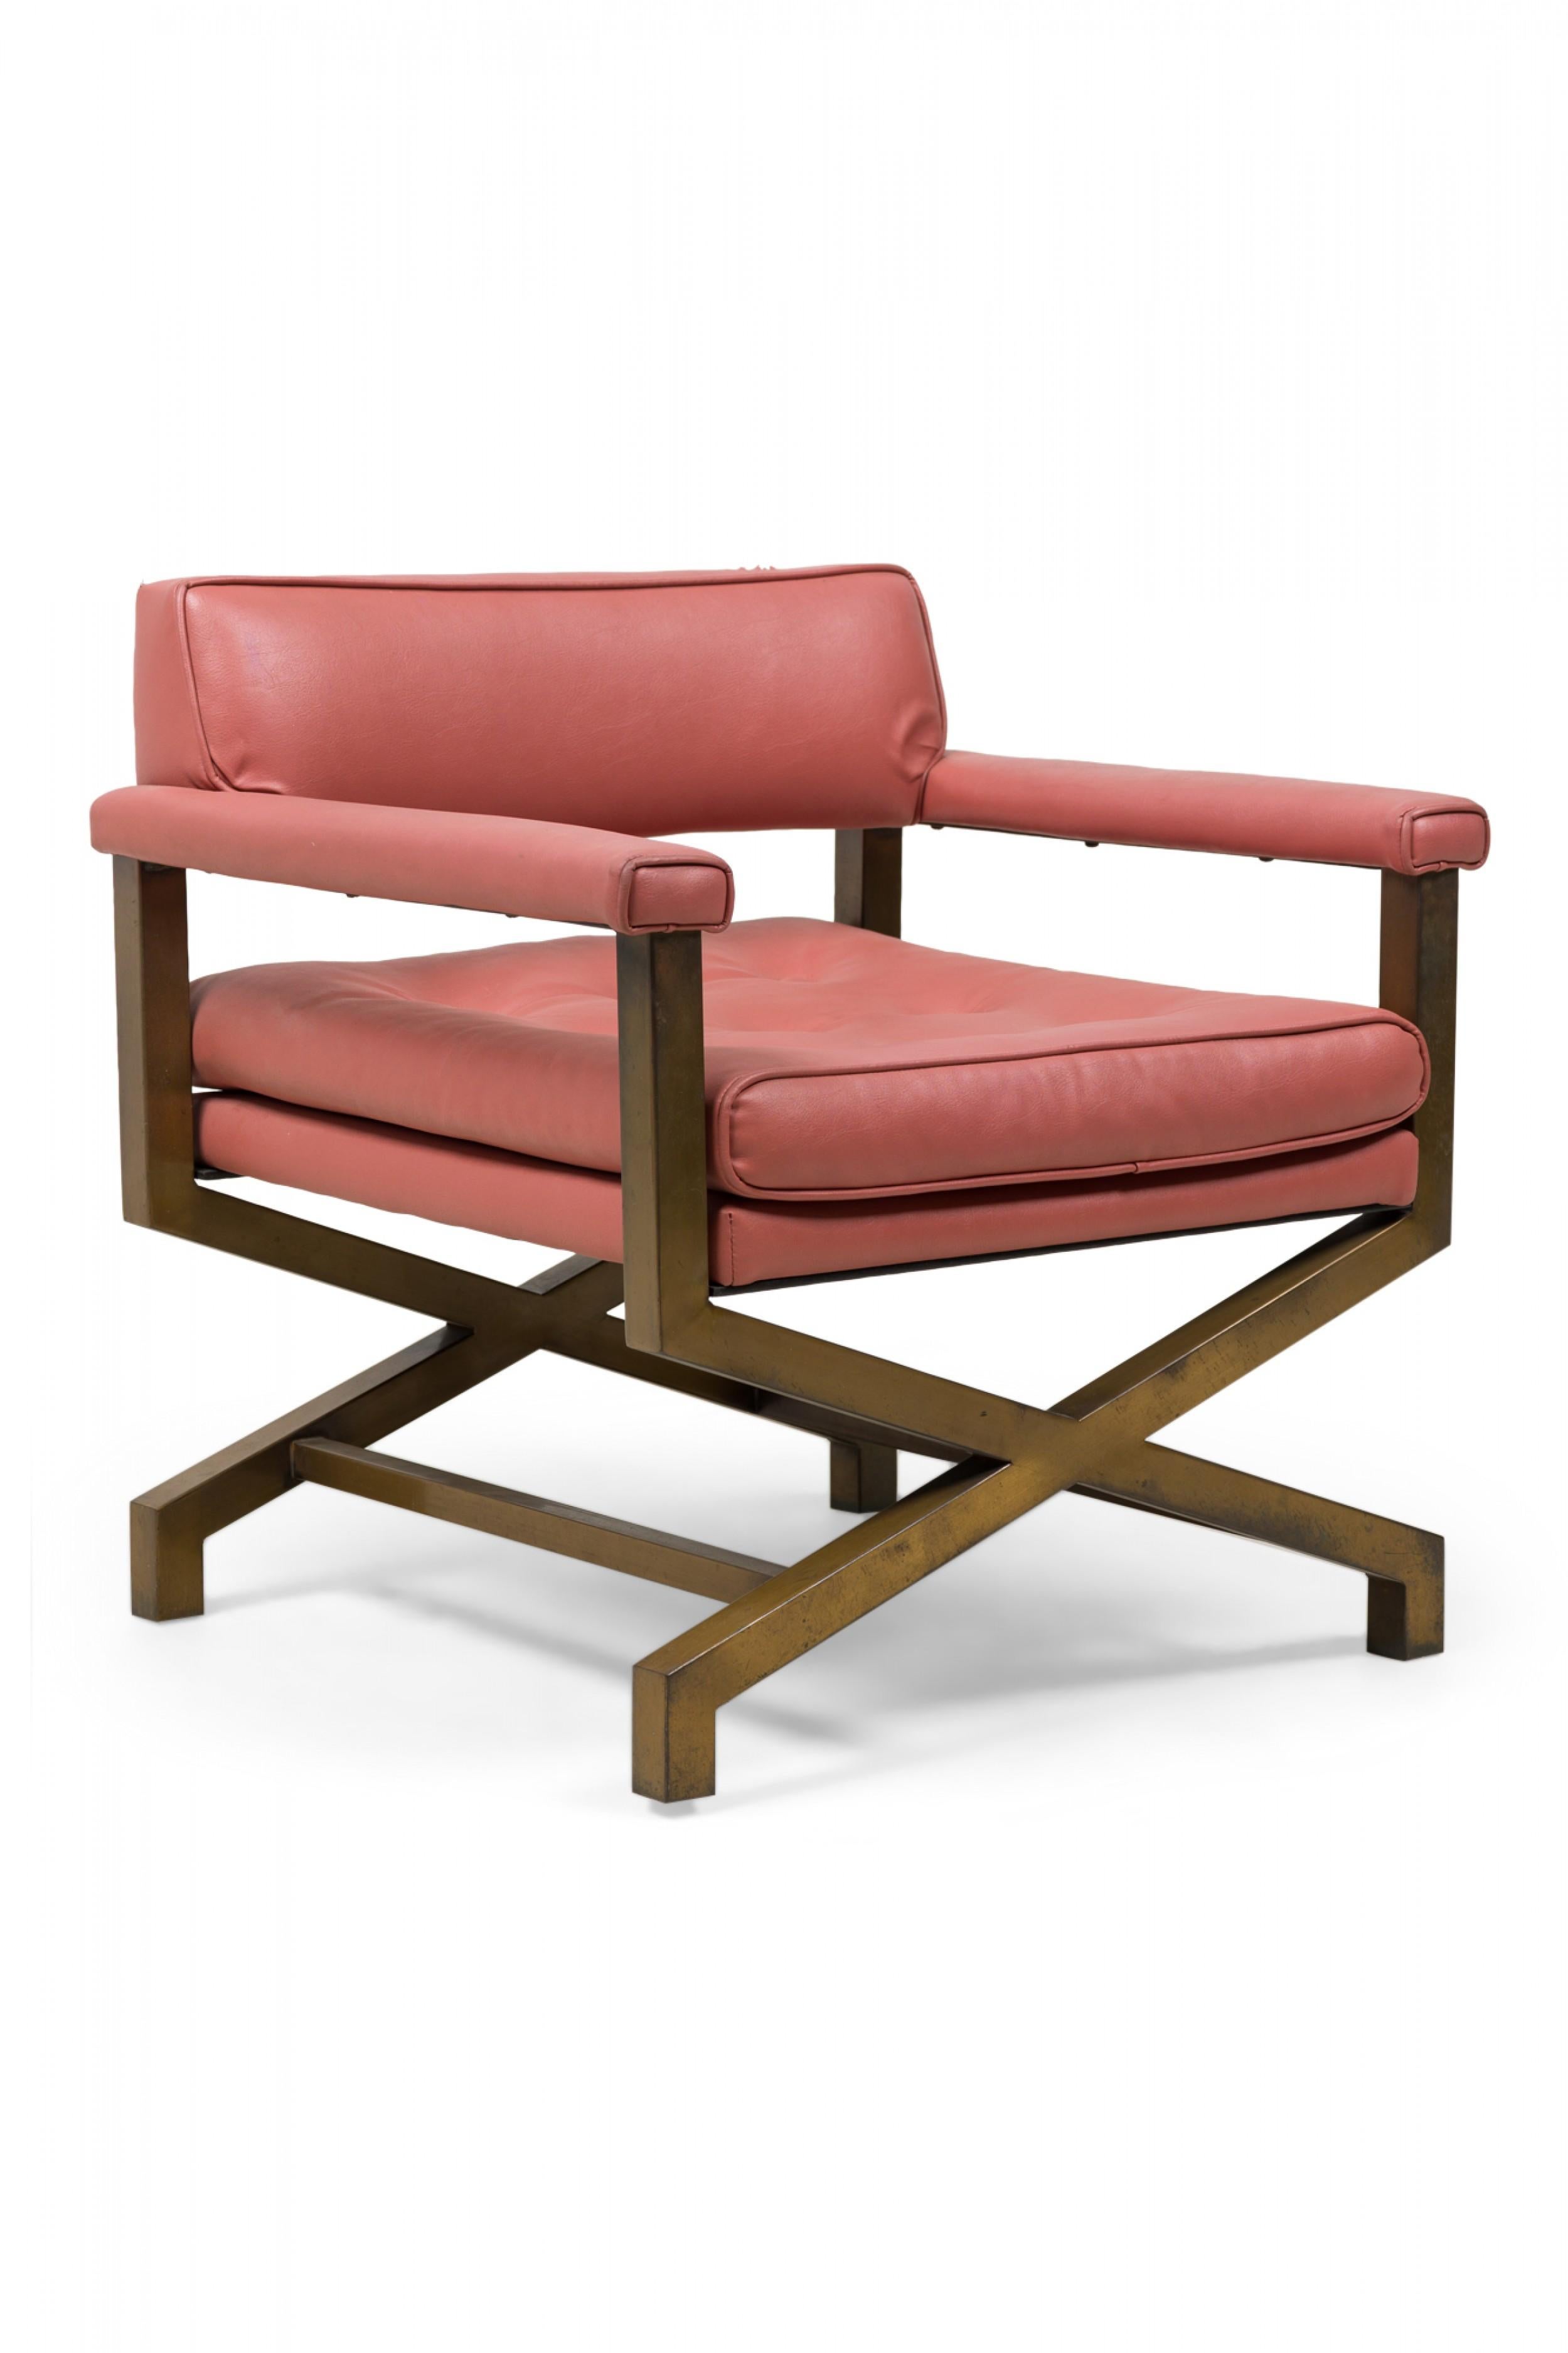 PAIR of Midcentury American campaign / armchairs with an X-form metal frame with brushed brass finish and low backs, upholstered in dark pink / mauve leather with button tufted seats (PRICED AS PAIR) (attributed to TOMMI PARZINGER).